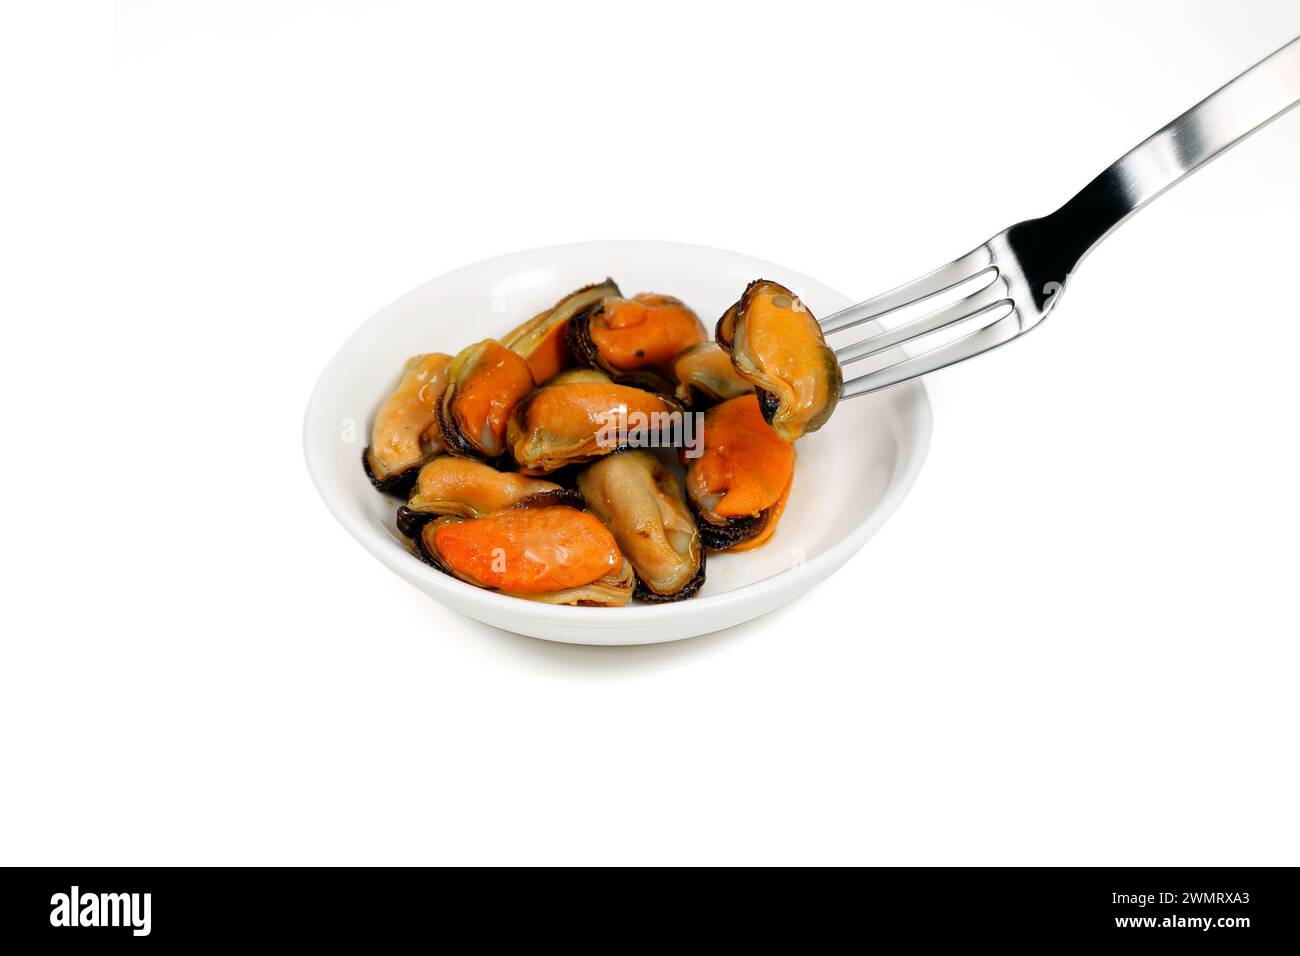 A fork picks up tinned canned smoked mussels from a dish, shellfish isolated on a white background. Stock Photo